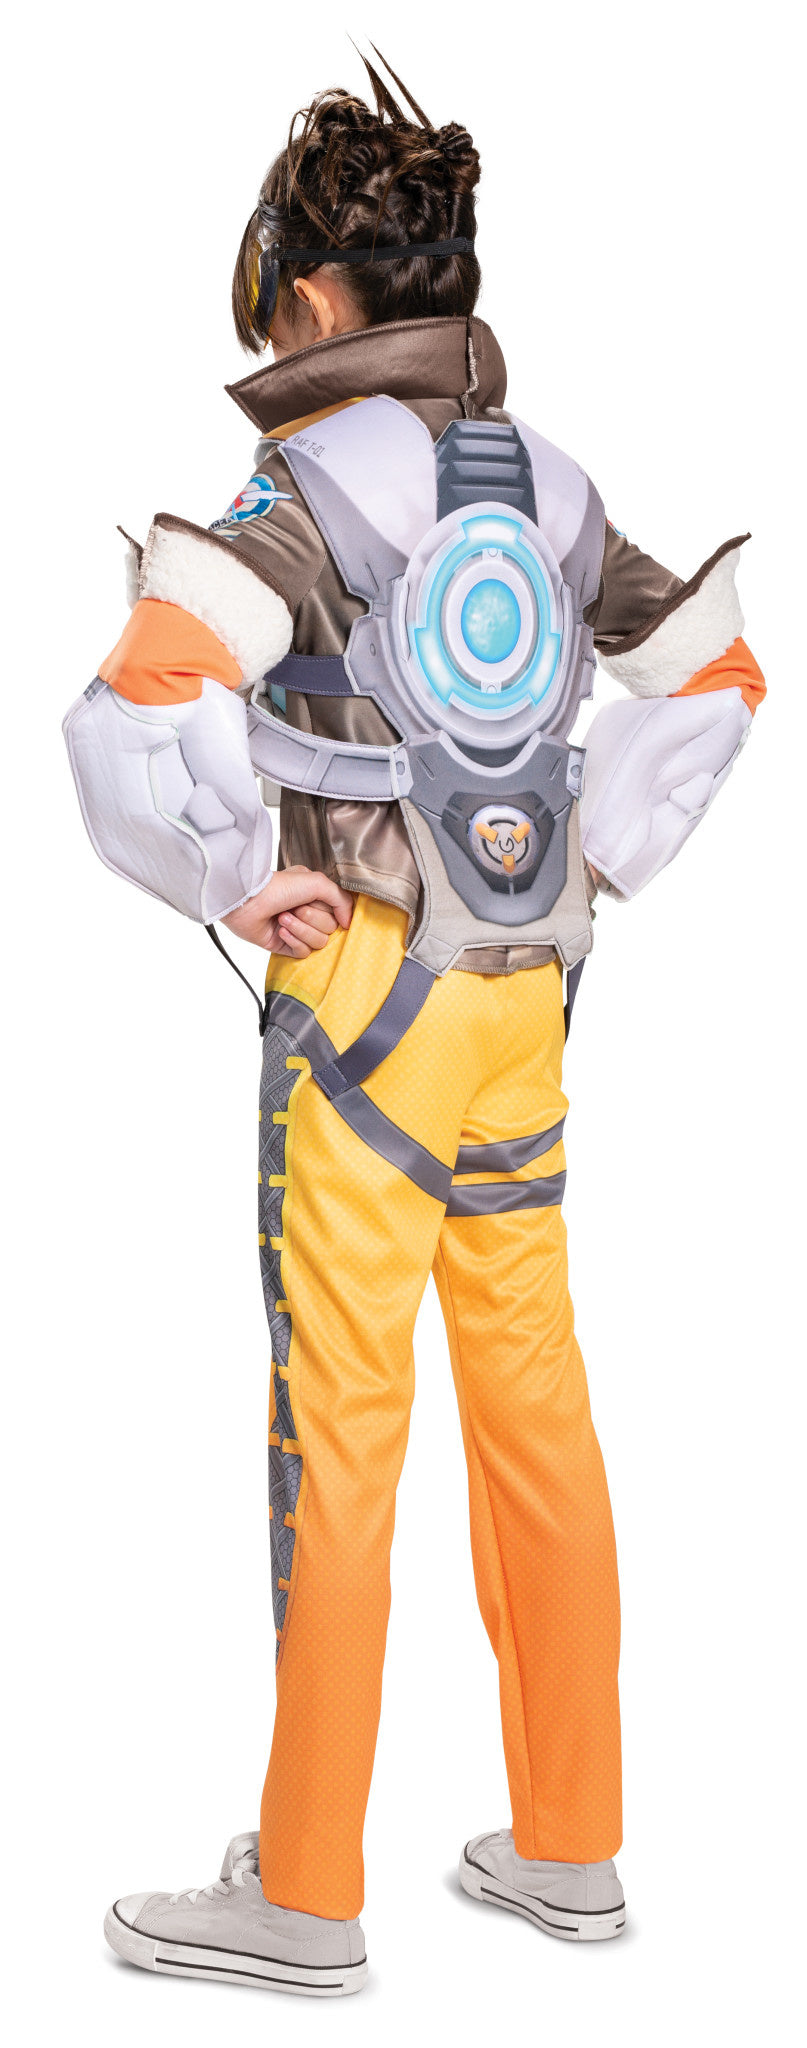 Overwatch Tracer Deluxe Child Costume, Large (10-12)